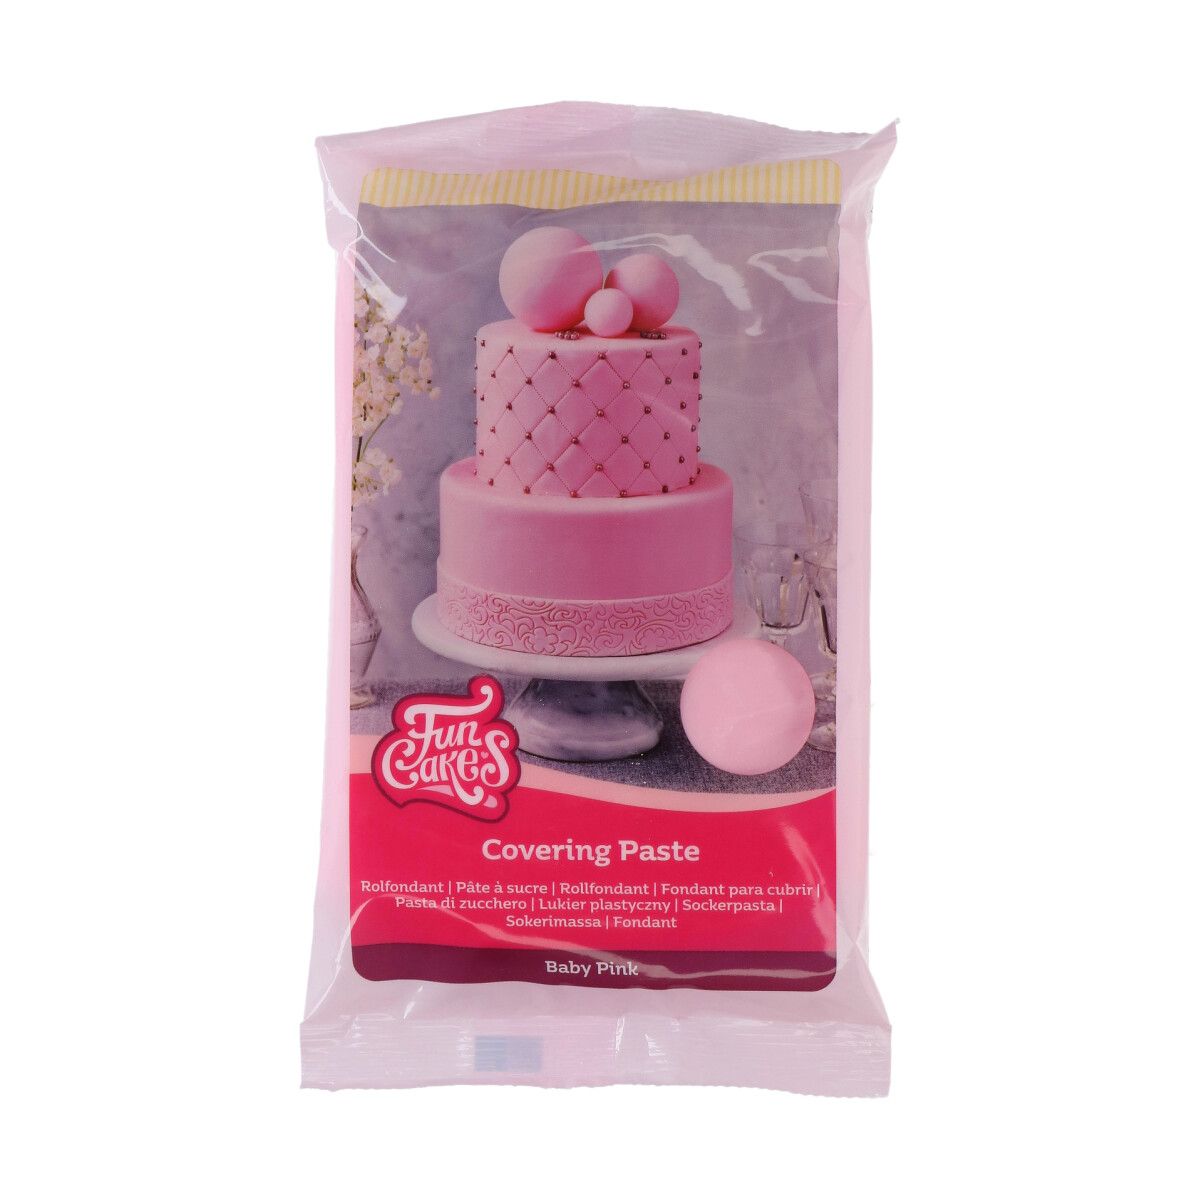 FUNCAKES COVERING PASTE 500G pink